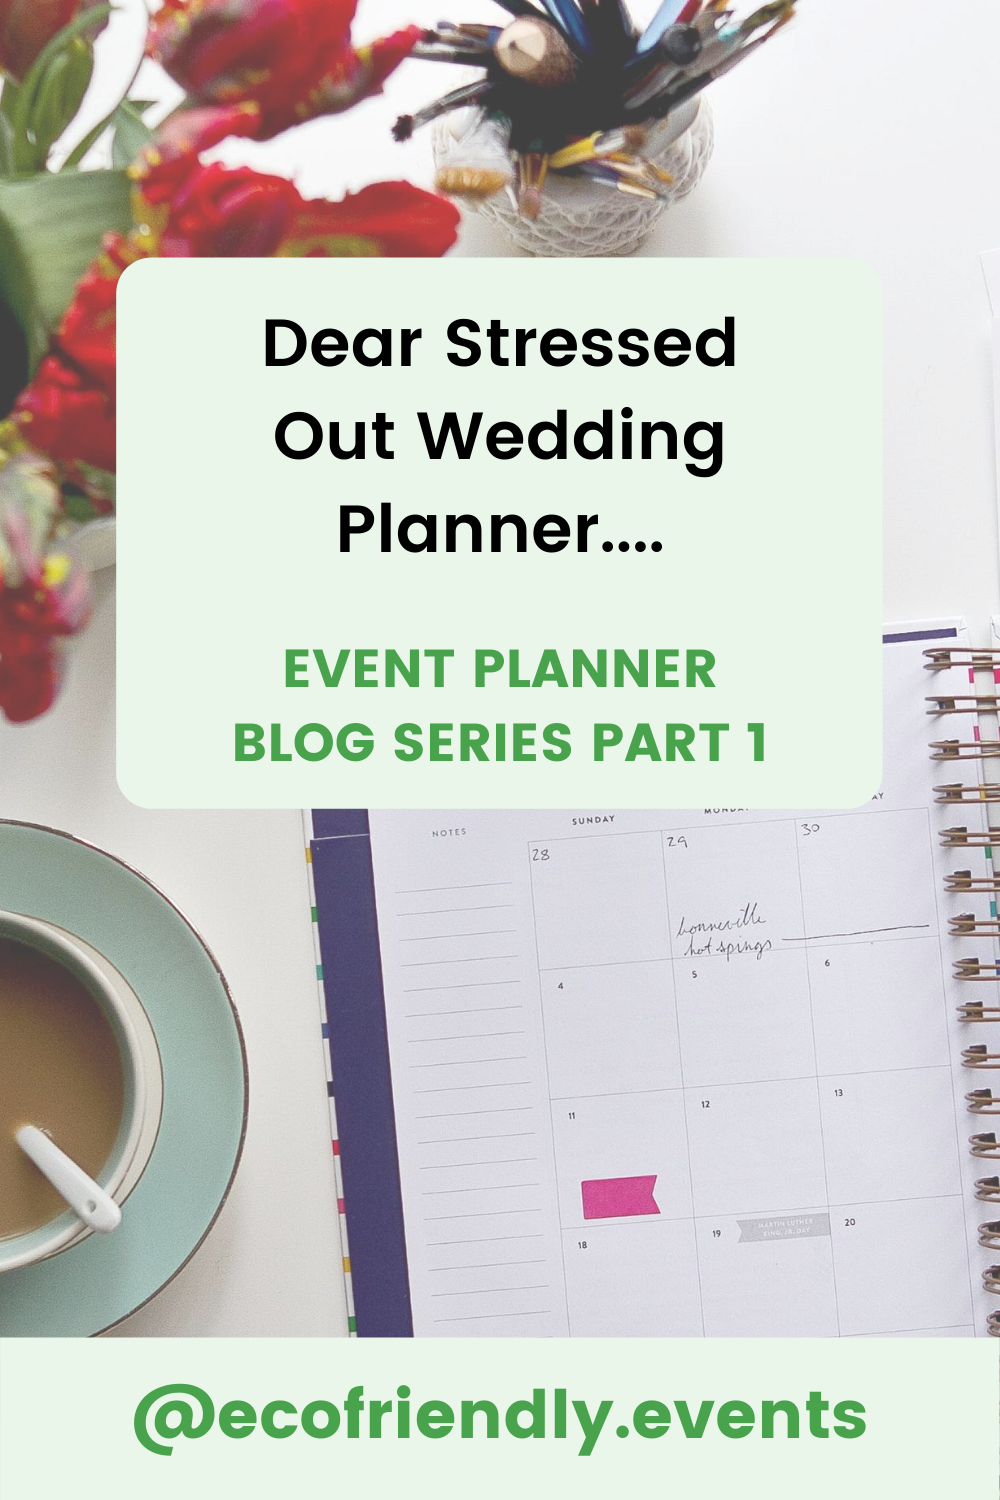 Image of planner, coffee cup and flowers on a desk with a green box and heading that reads Dear Stressed Out Wedding Planner... Event Planner Blog Series Part 1